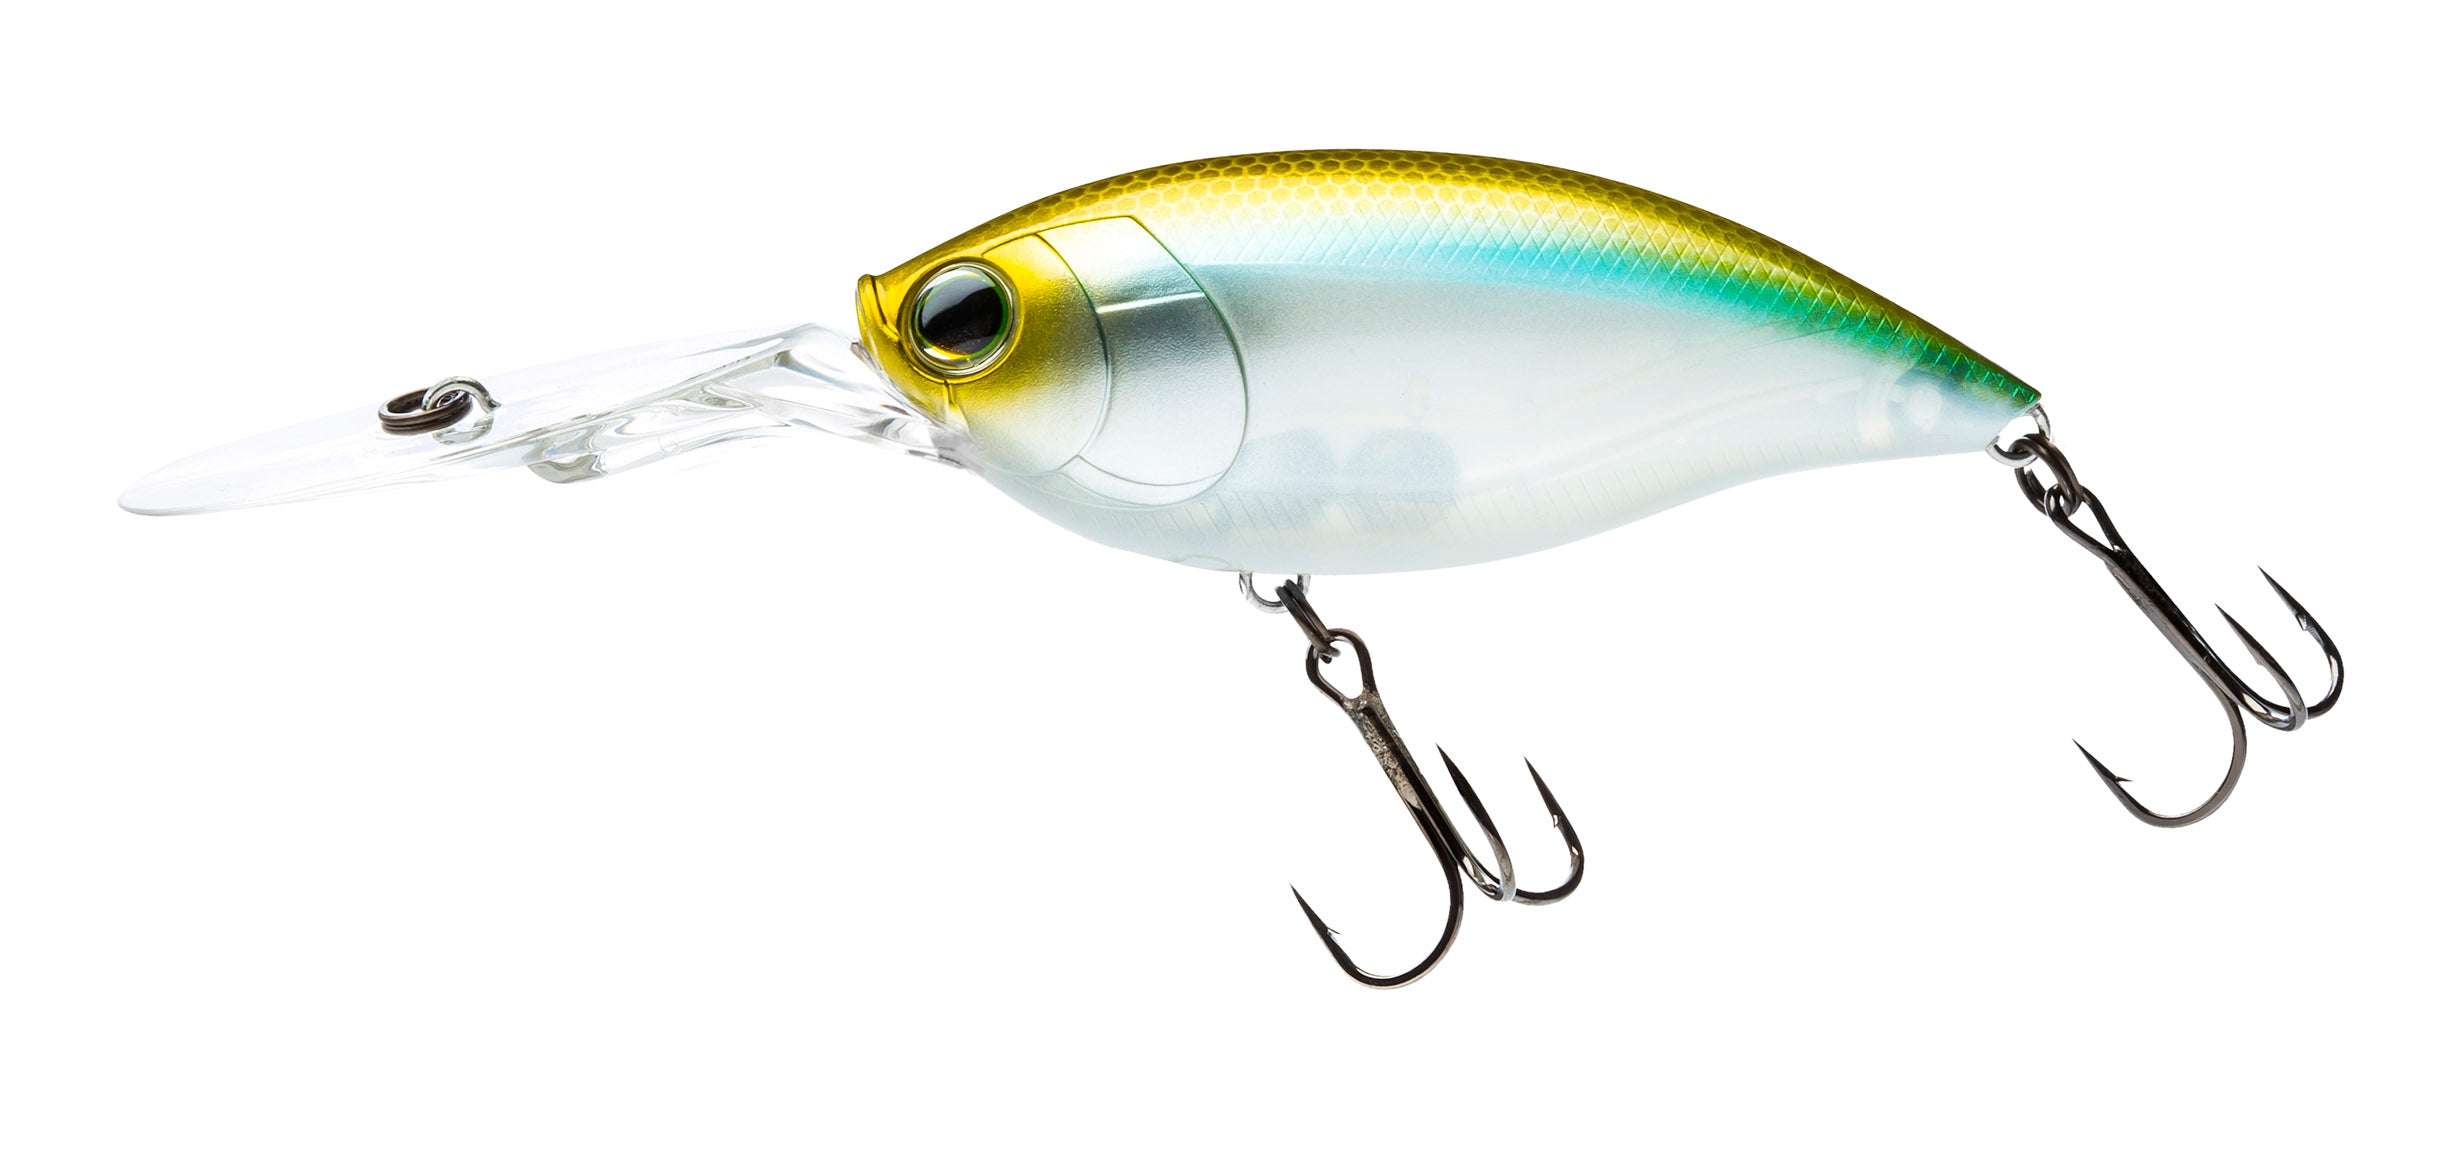 Duel R1377-GSPS Hardcore Crank 4+ 75F 75mm 3 Ghost Pearl Shad